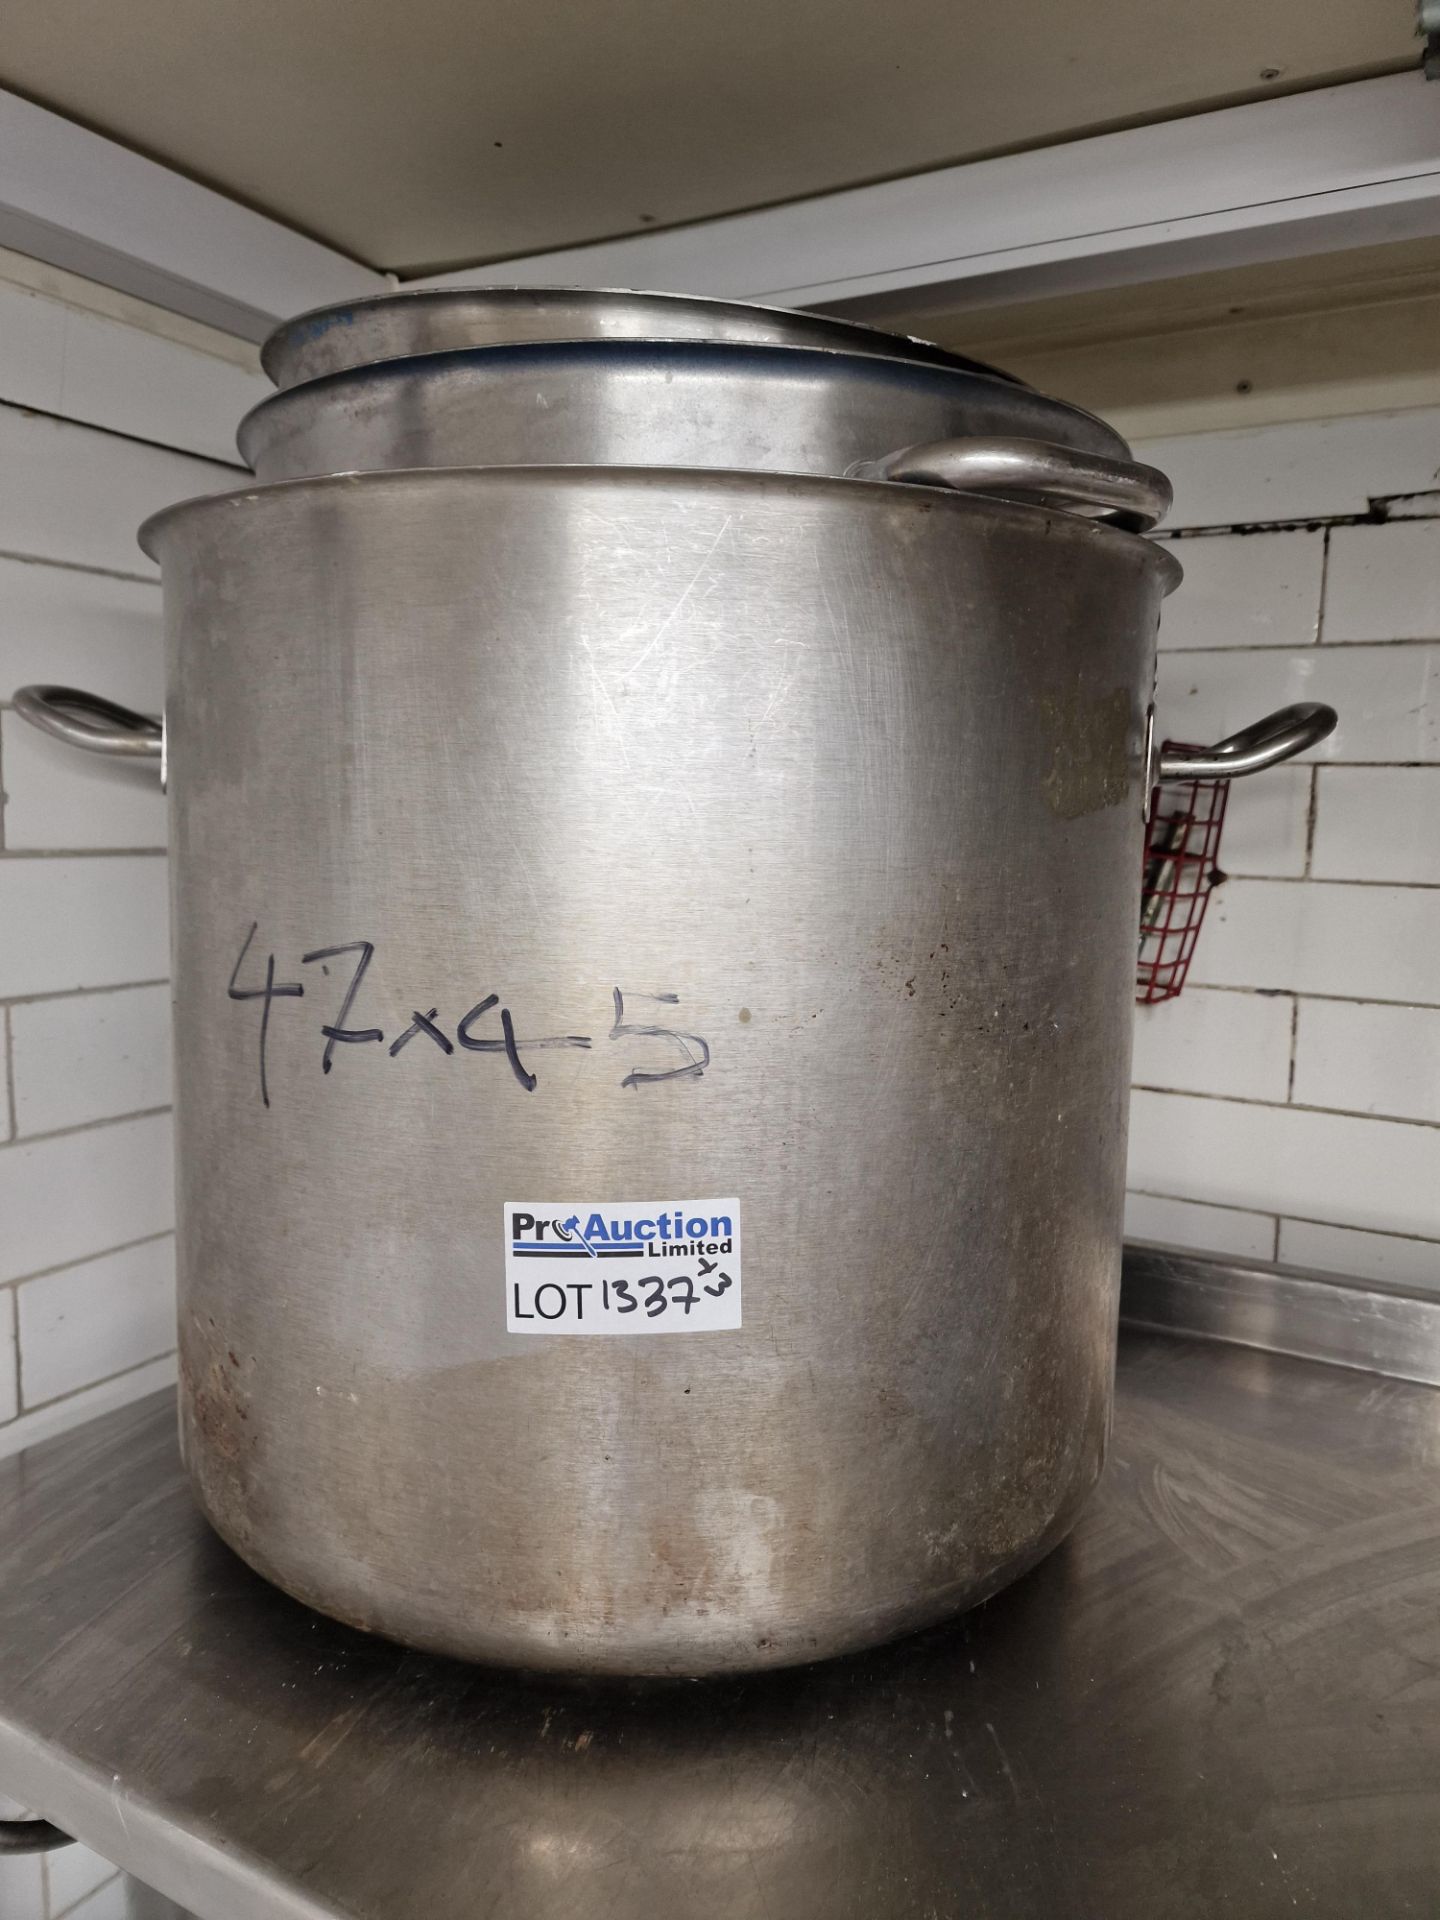 3 x Stainless Steel Commercial Stock Pots 47 x 45cm, 42 x 27cm And 38 x 10cm Approximately 78 Litre,